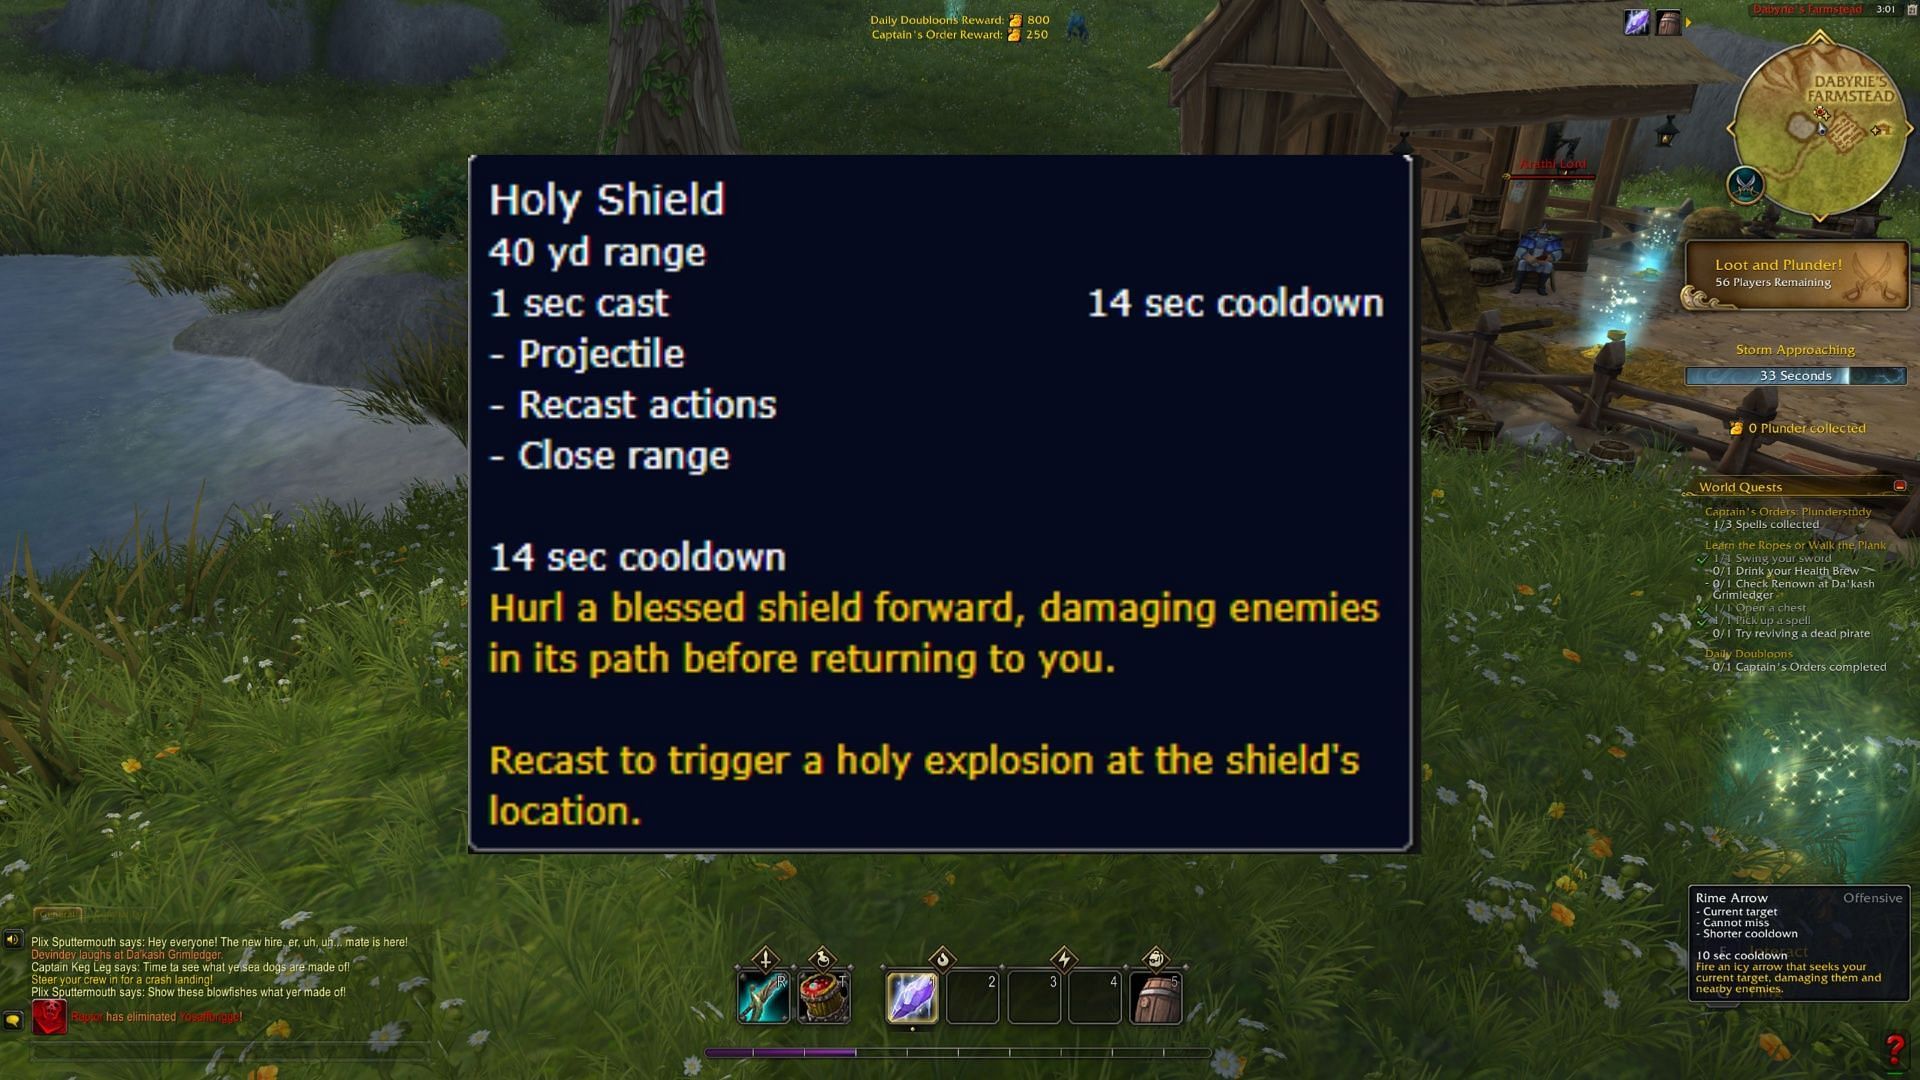 Holy Shield in WoW (Image via Blizzard Entertainment)